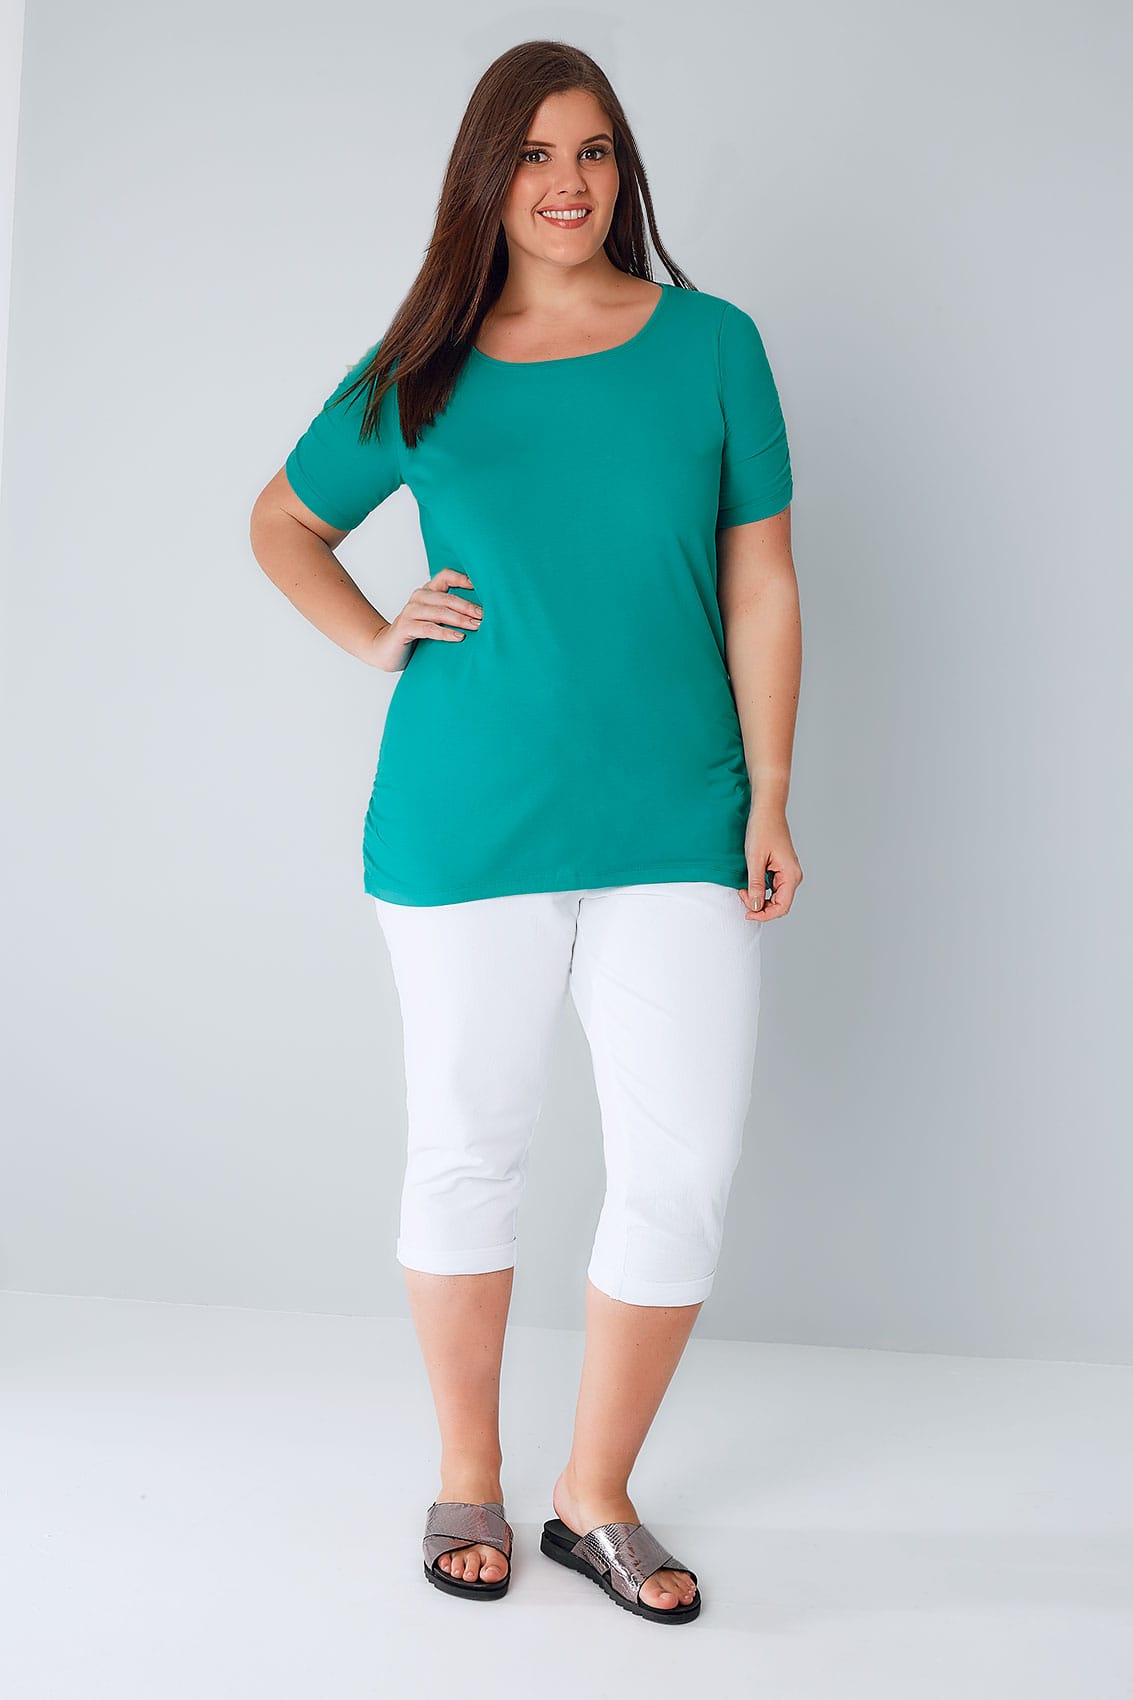 Jade Green T-Shirt With Ruched Short Sleeves, Plus size 16 to 32